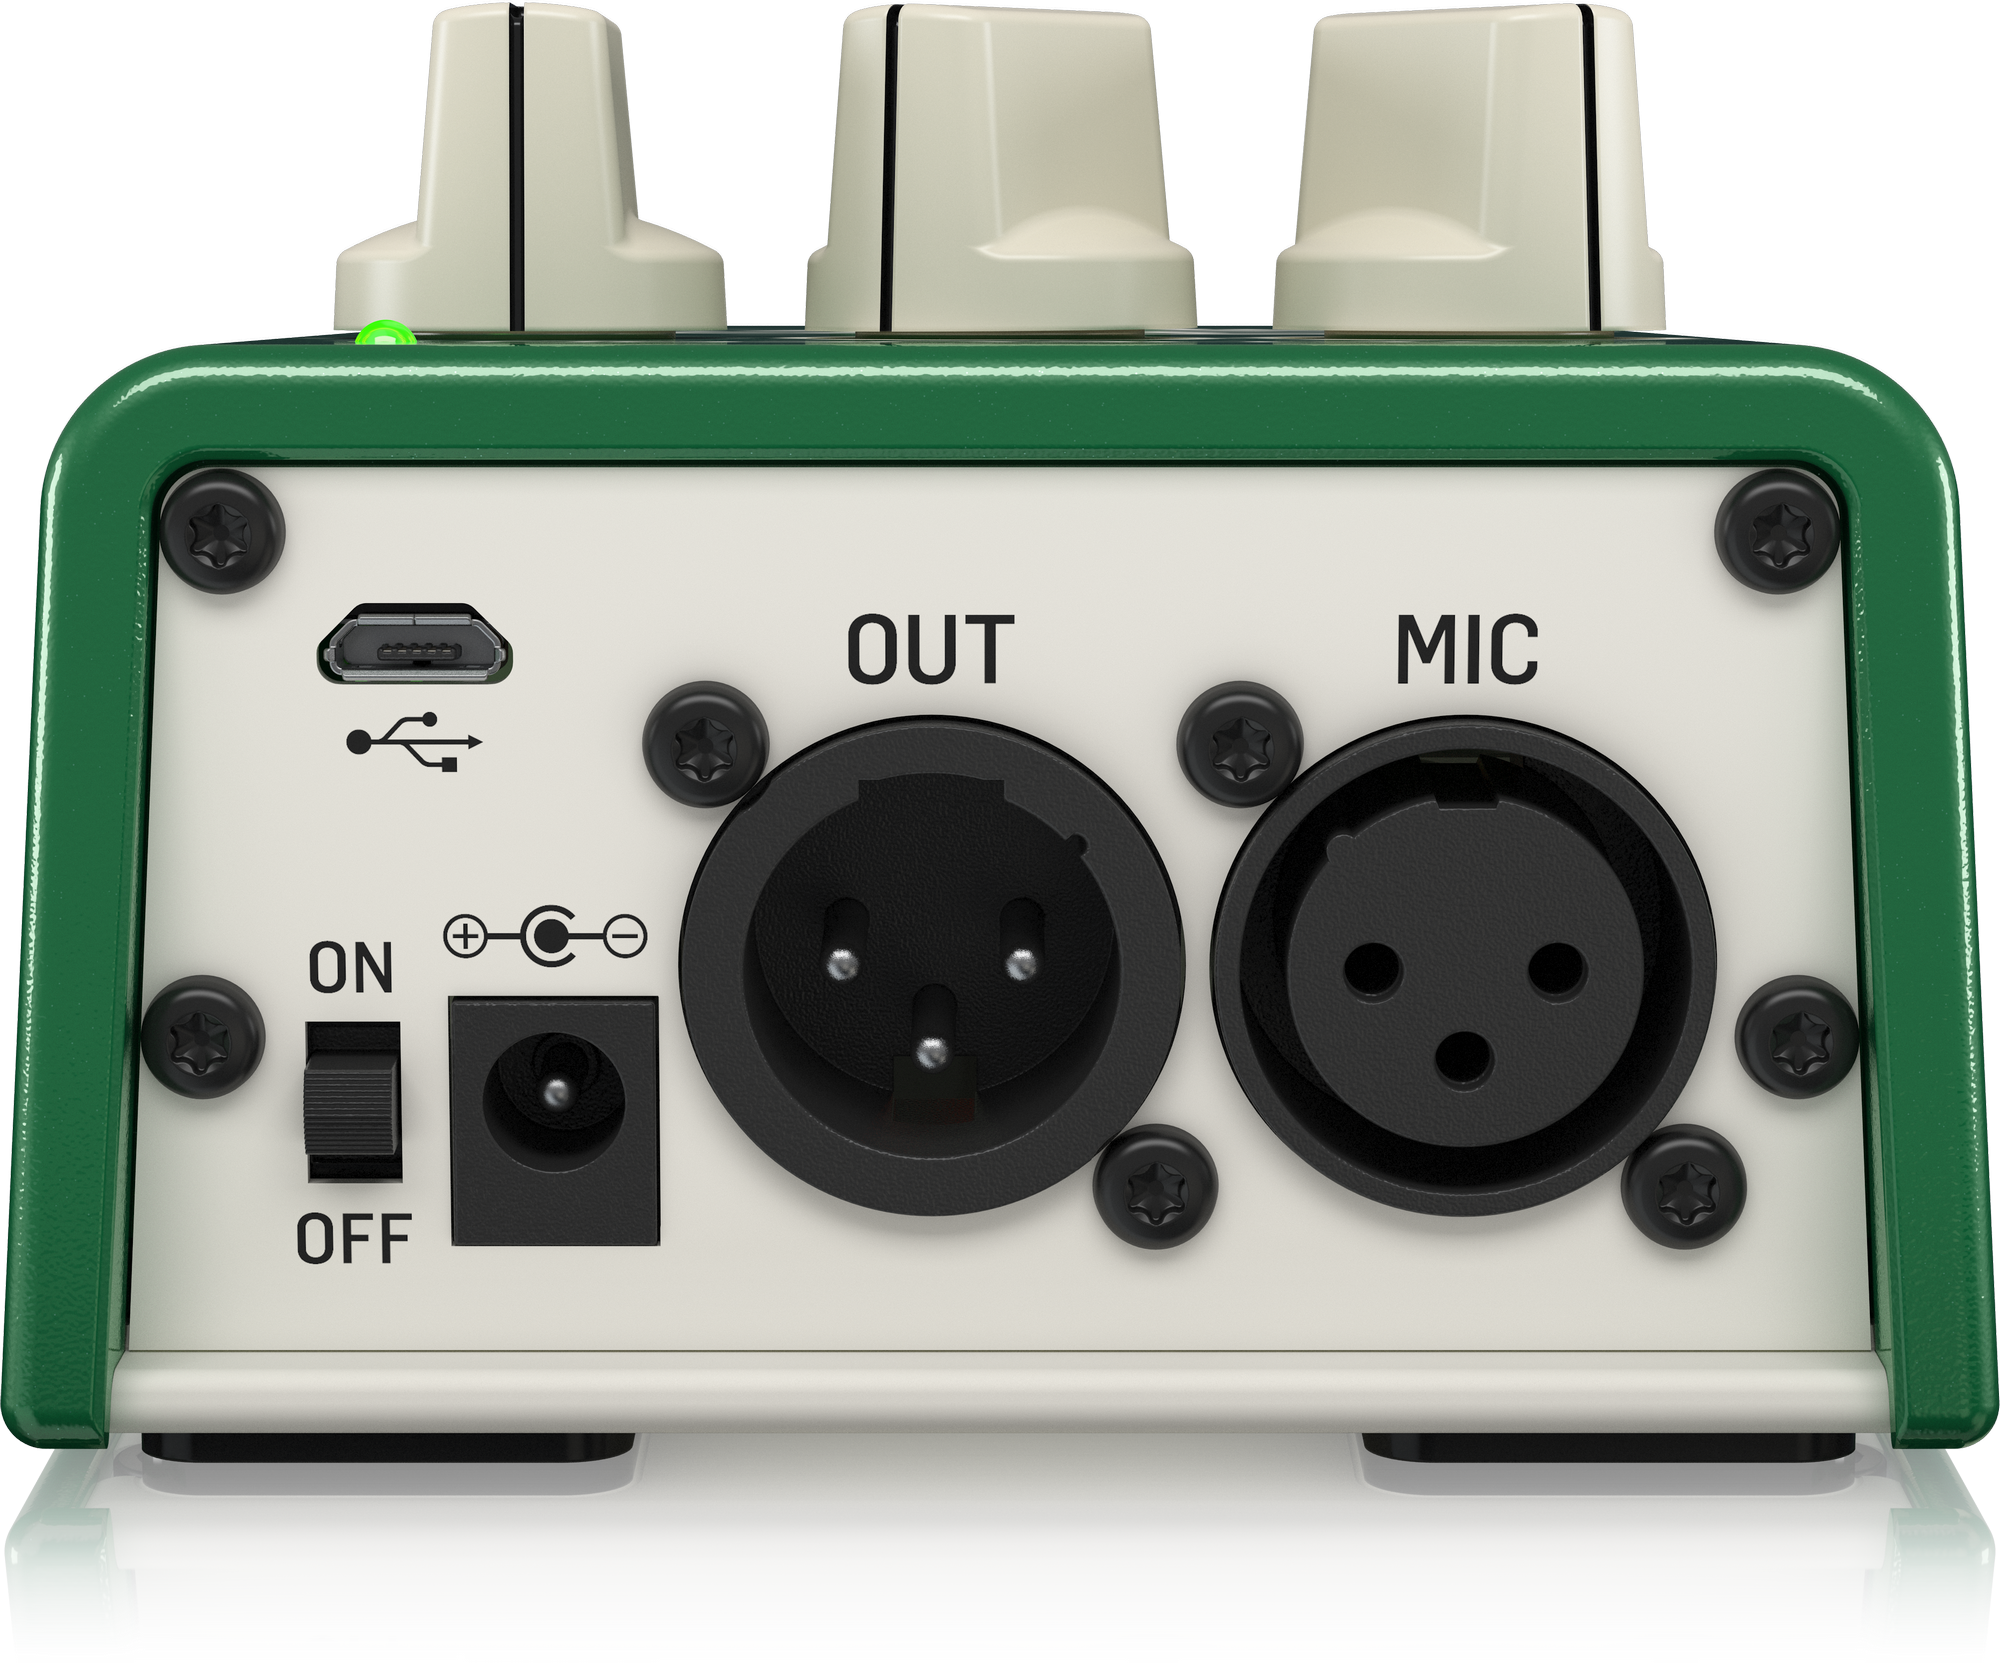 TC HELICON DUPLICATOR ULTRA-SIMPLE VOCAL EFFECTS STOMPBOX WITH DOUBLING, REVERB AND PITCH CORRECTION, TC HELICON, VOCAL PROCESSORS, tc-helicon-vocal-processors-duplicator, ZOSO MUSIC SDN BHD